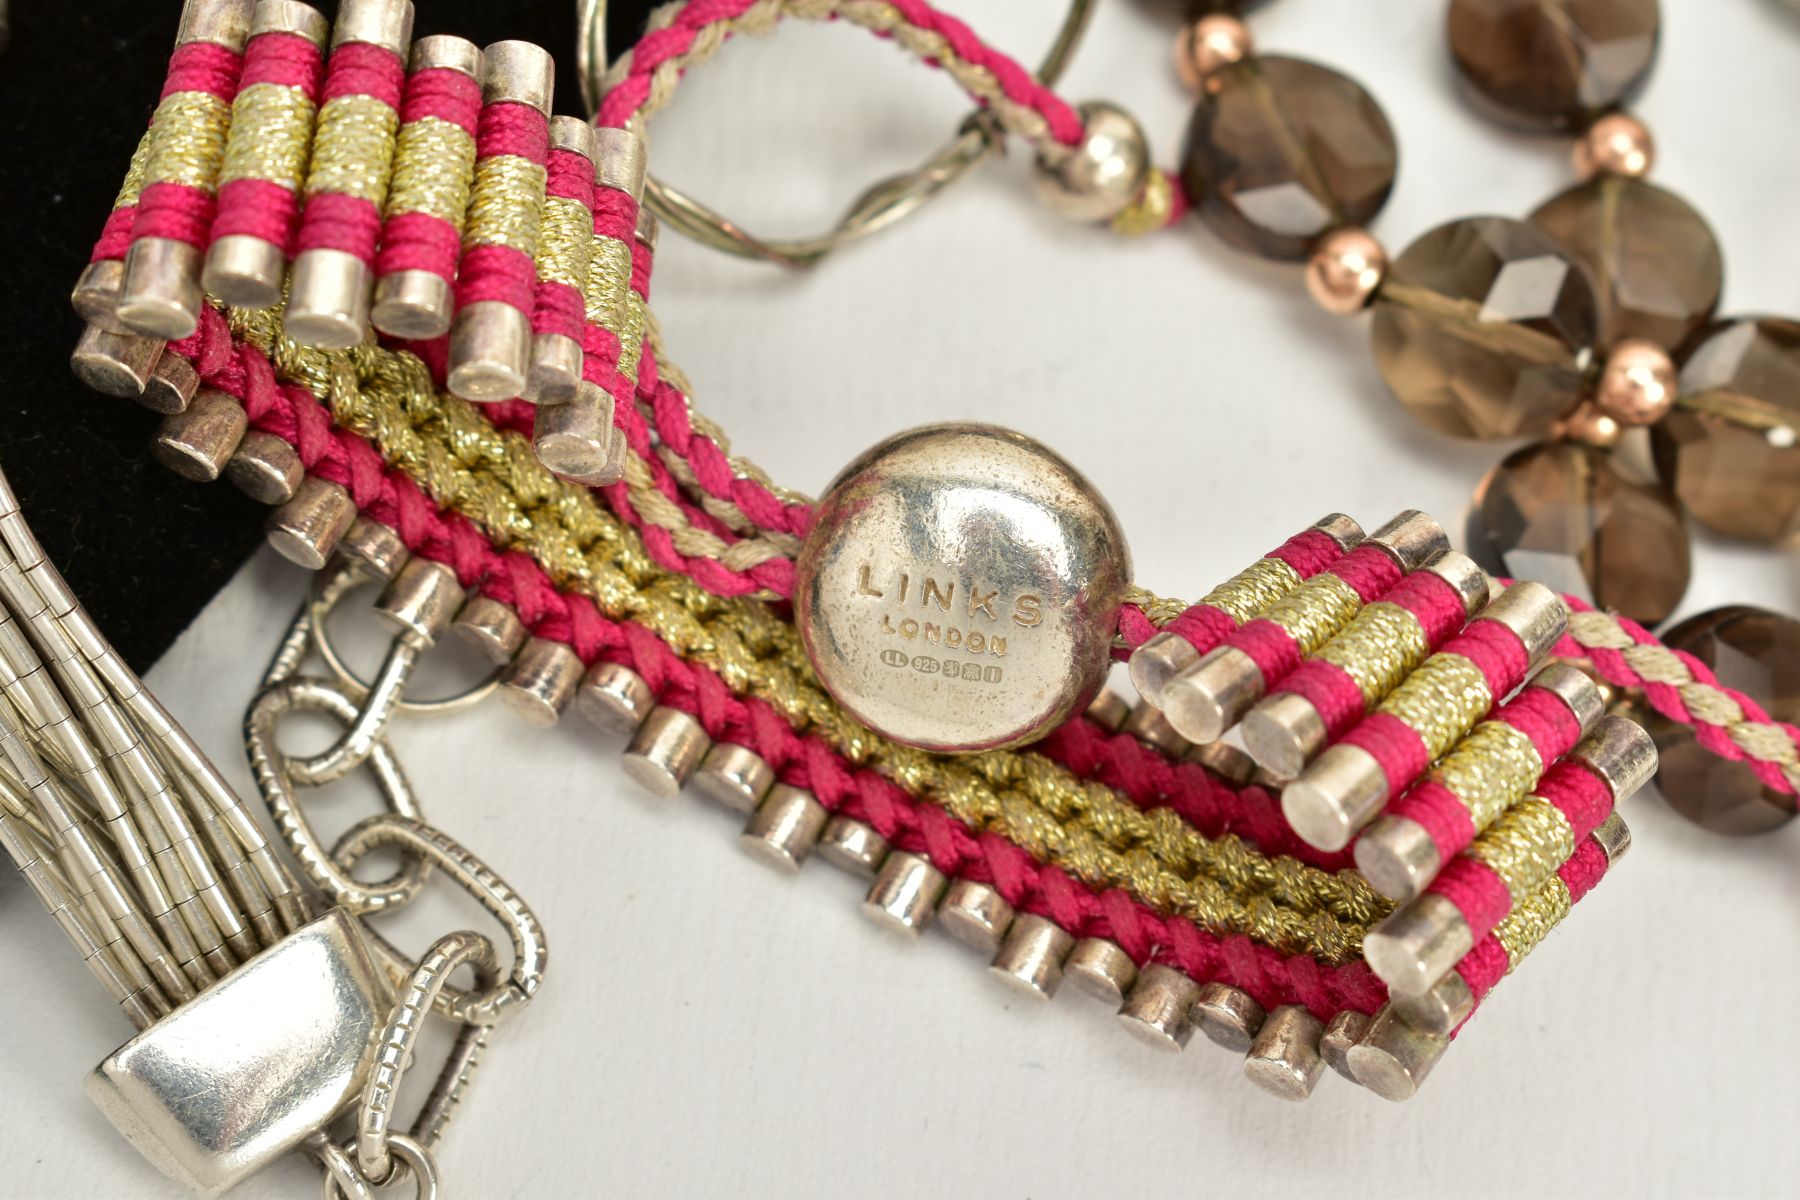 A SELECTION OF ITEMS, to include 'Links London' silver and pink cord pull bracelet, beaded clasp - Bild 4 aus 4